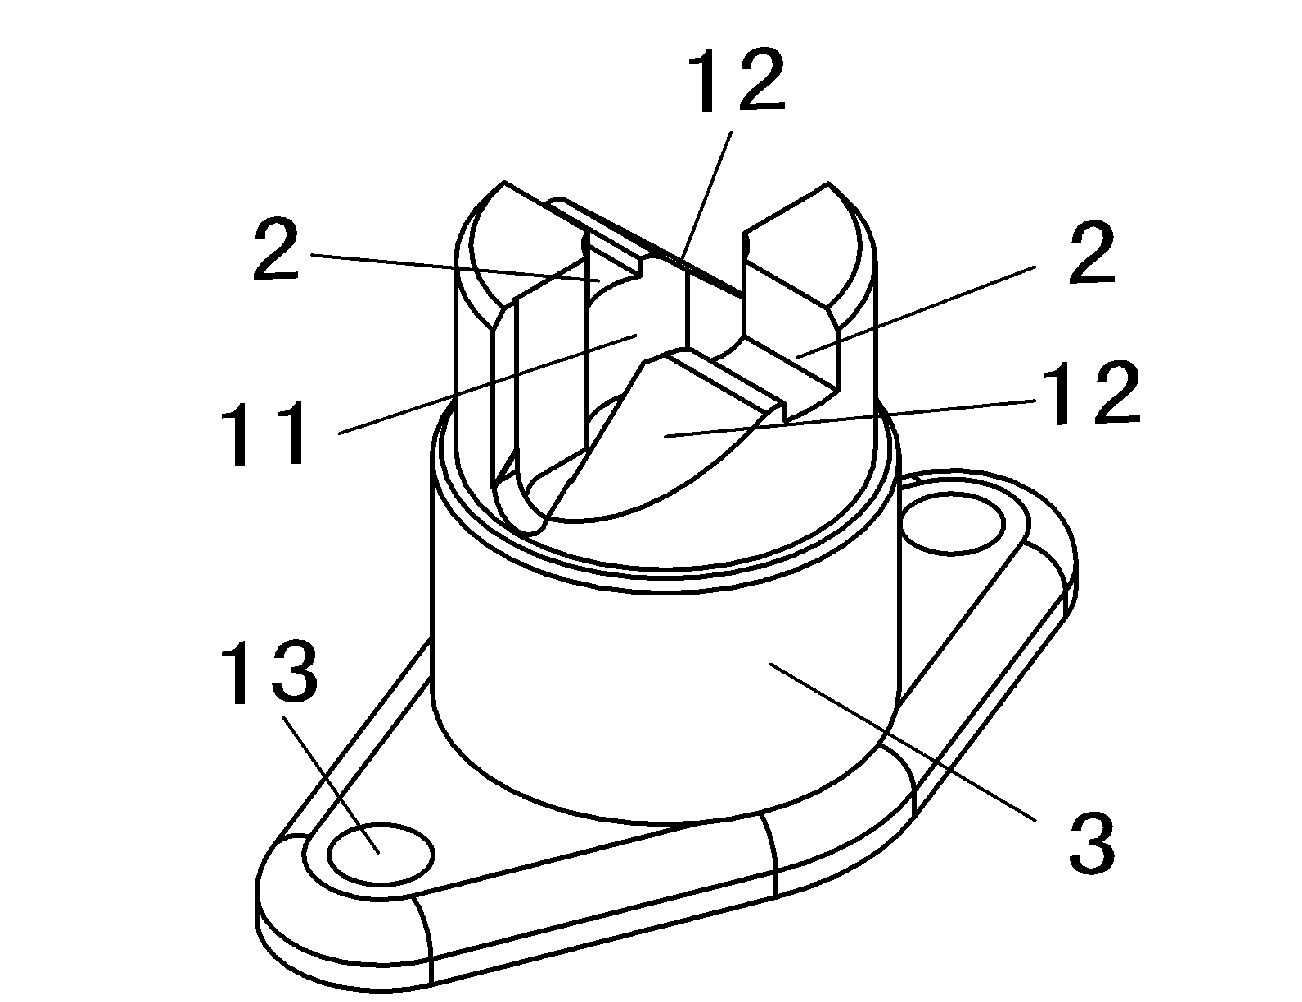 Fast-disassembly method of aeroplane access cover and bearing lock